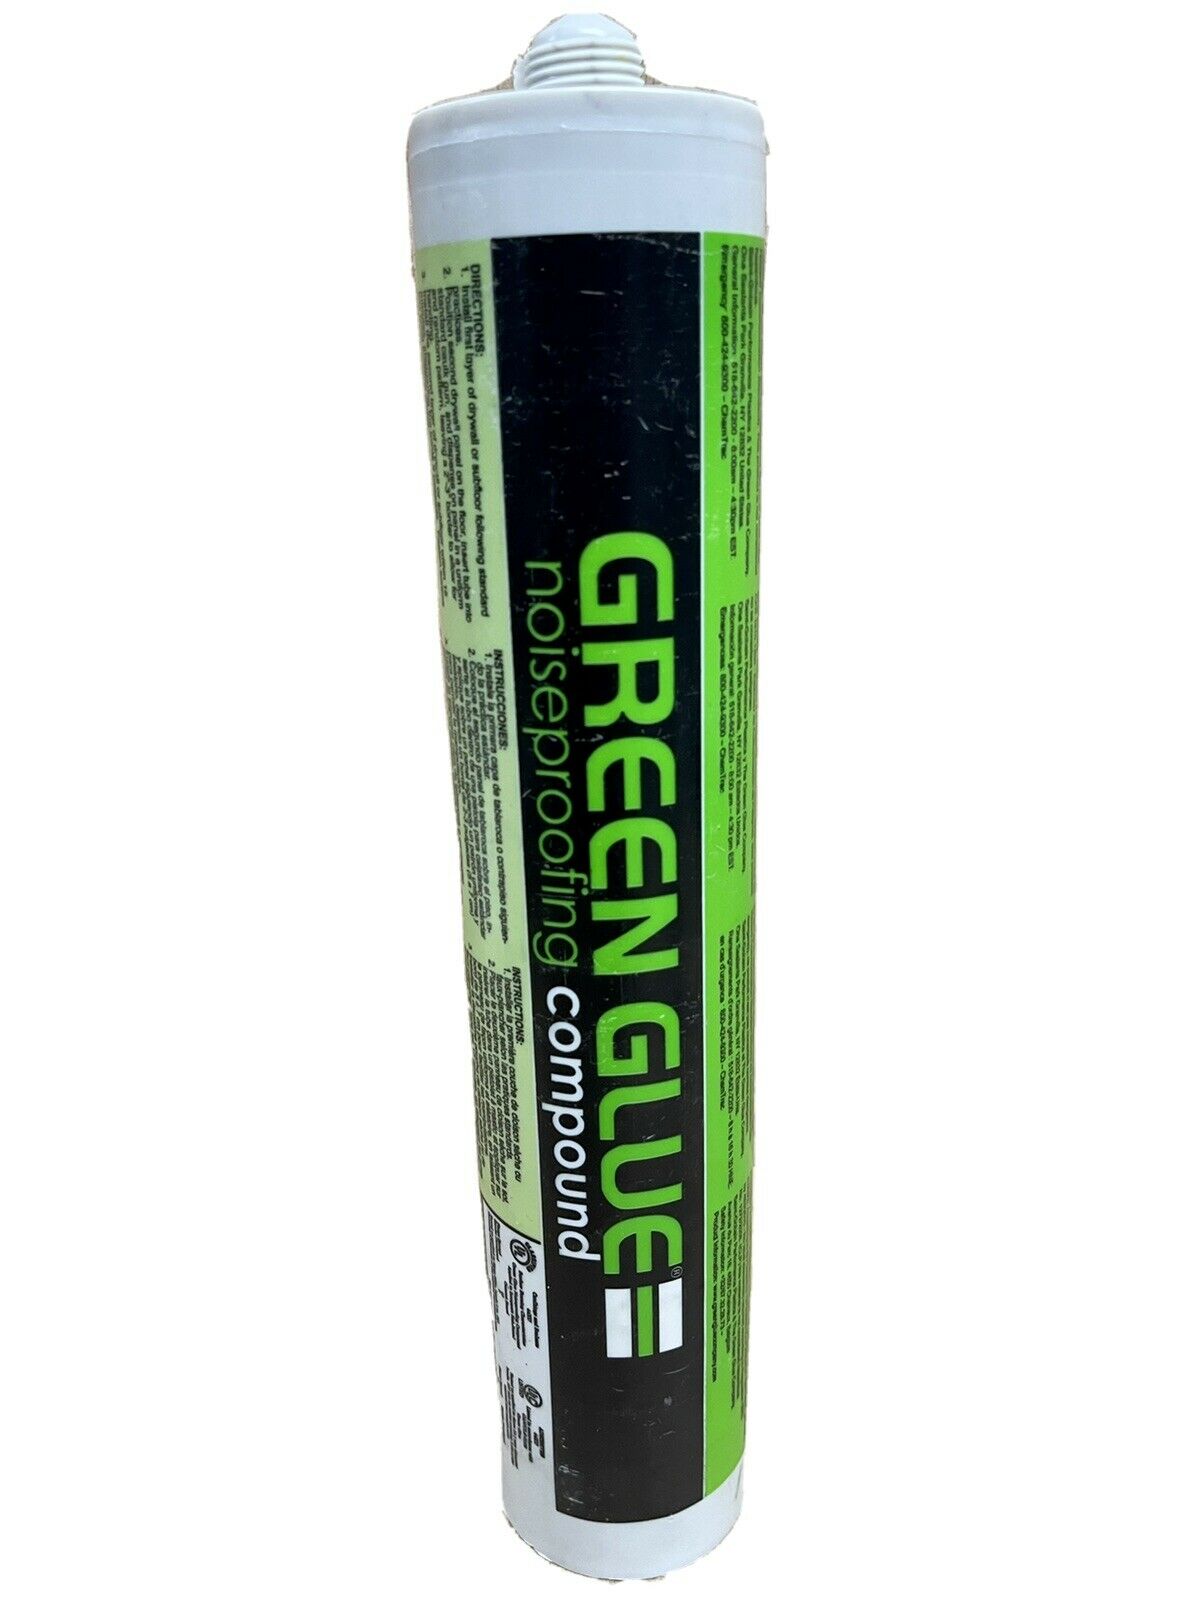 How Much Does Green Glue Cost